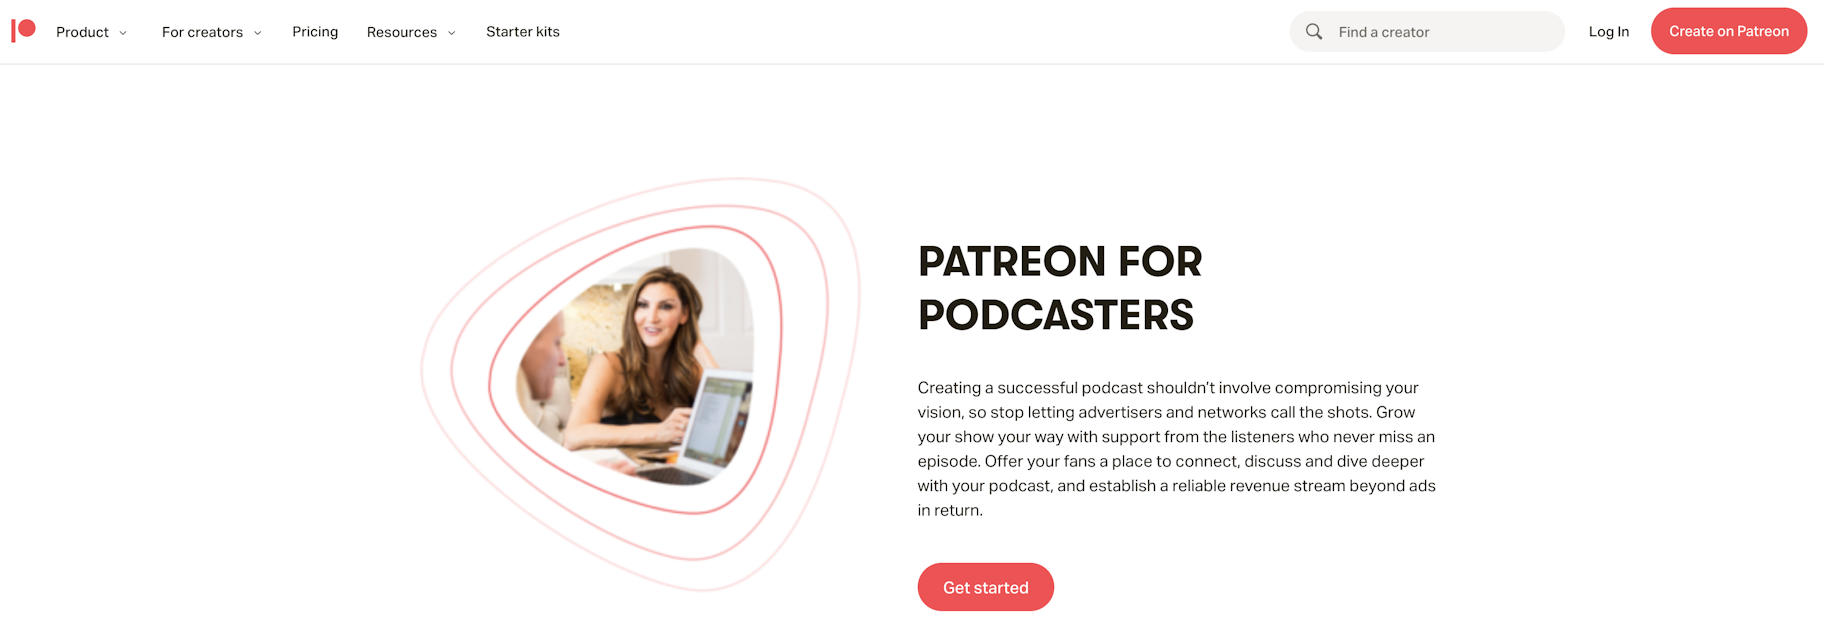 Podcast offer tiered Patreon subscription